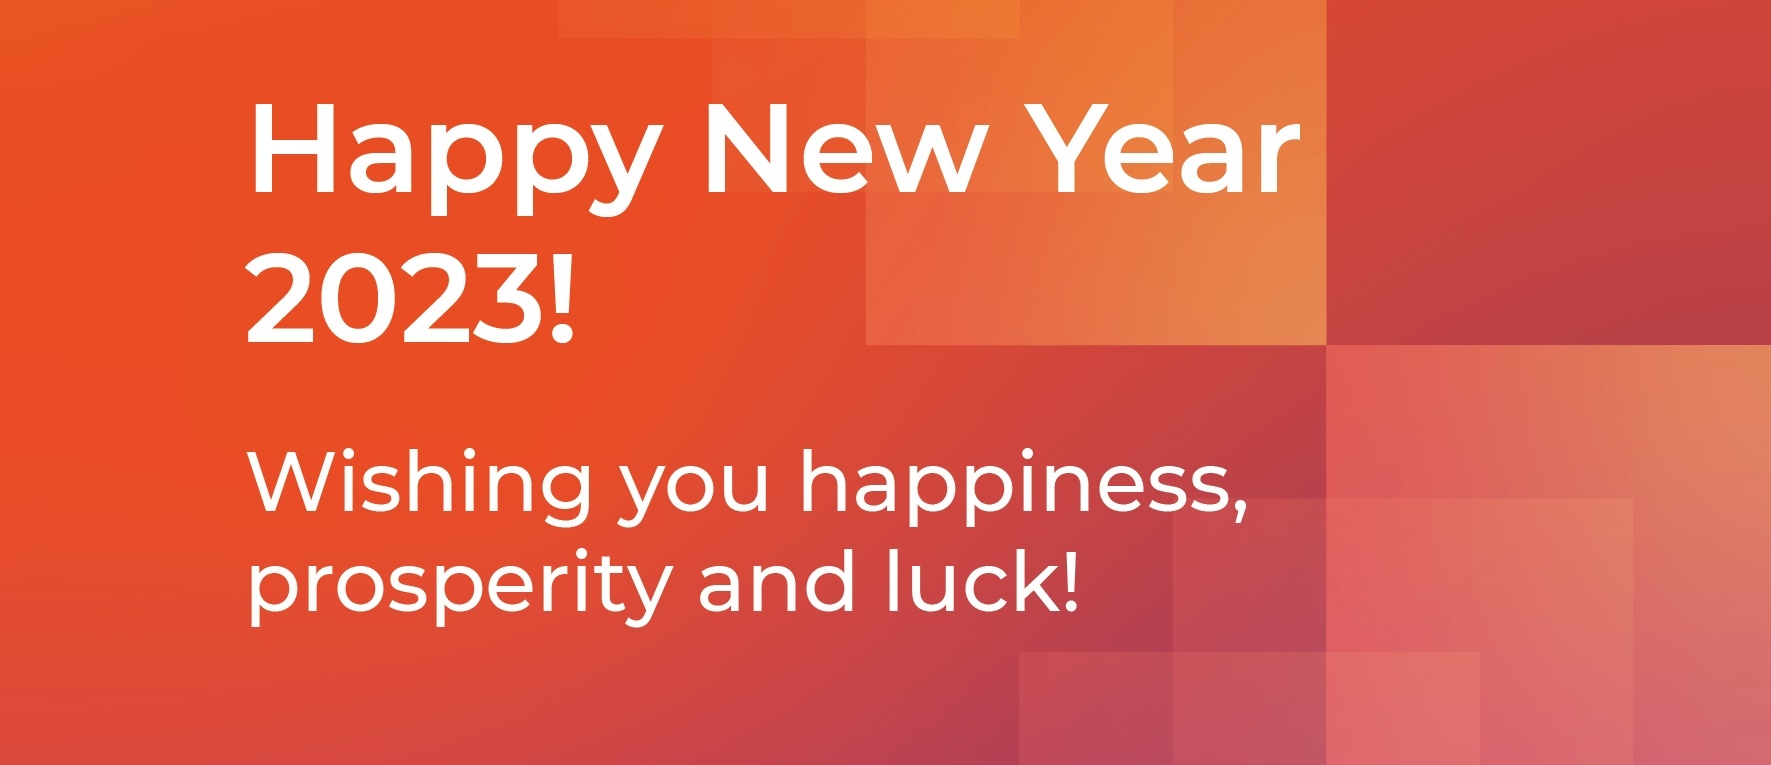 Happy New Year from the AIRVent team!